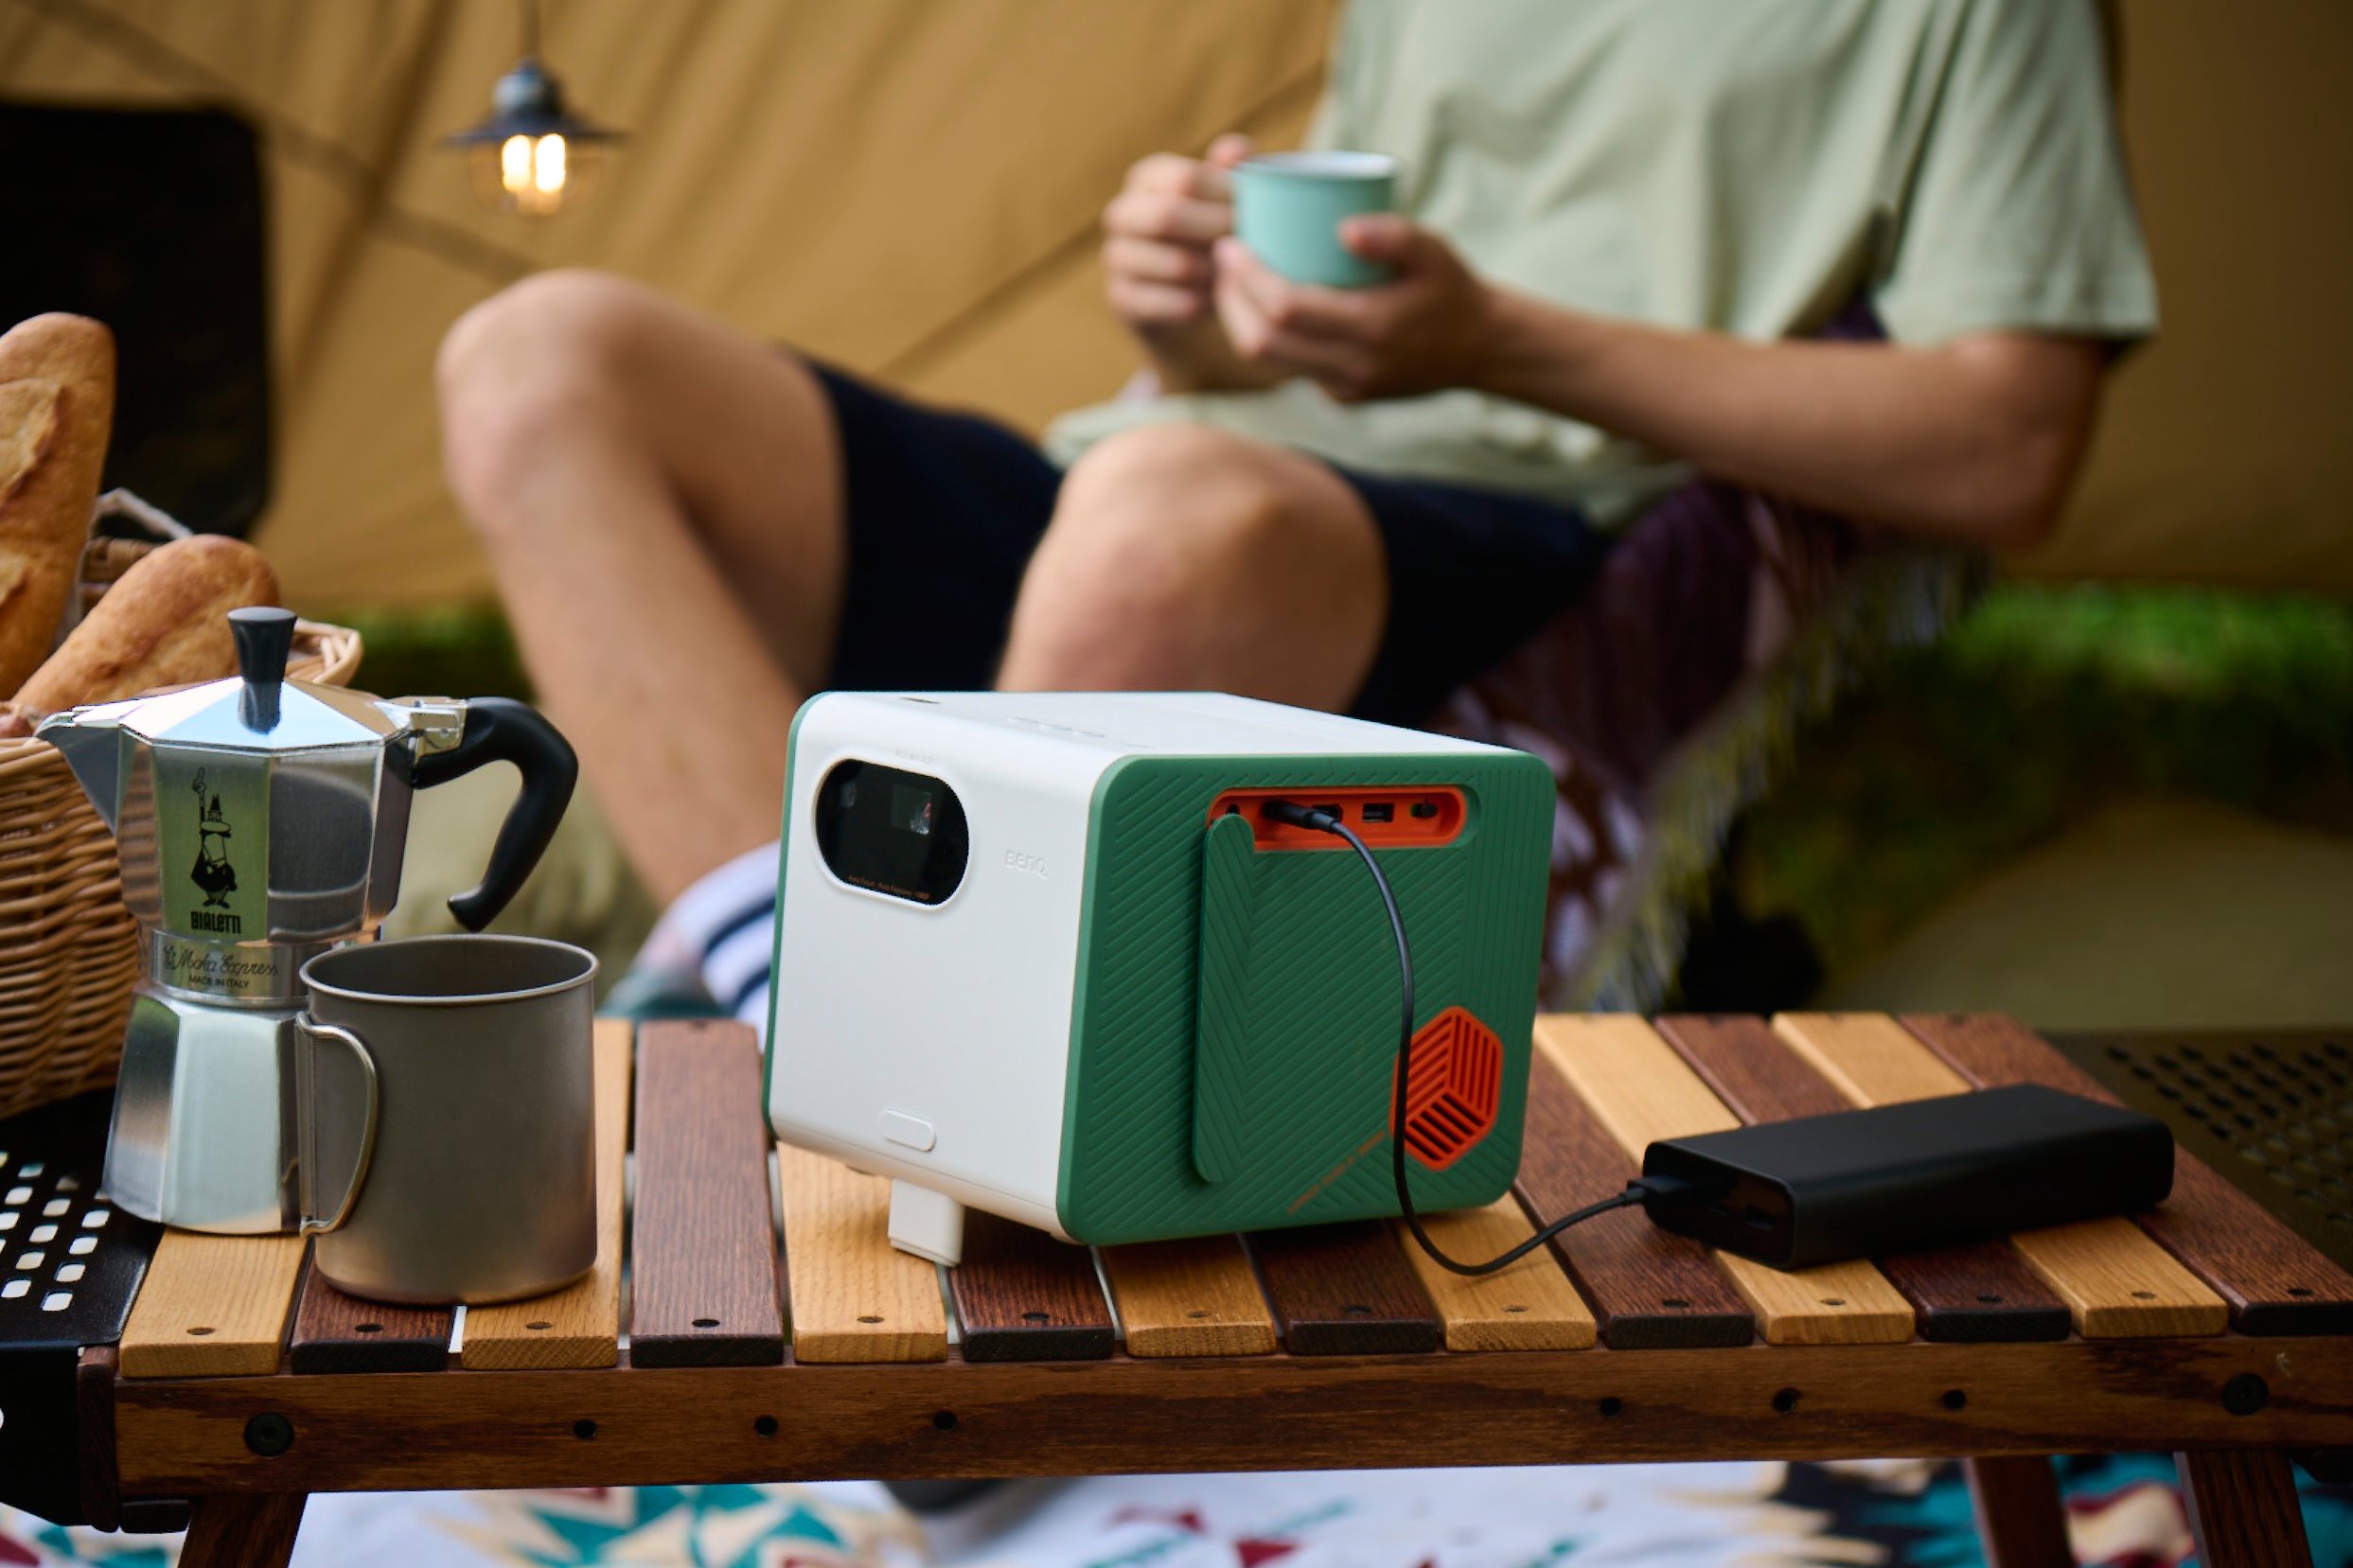 portable projector charging by a power bank at a campsite